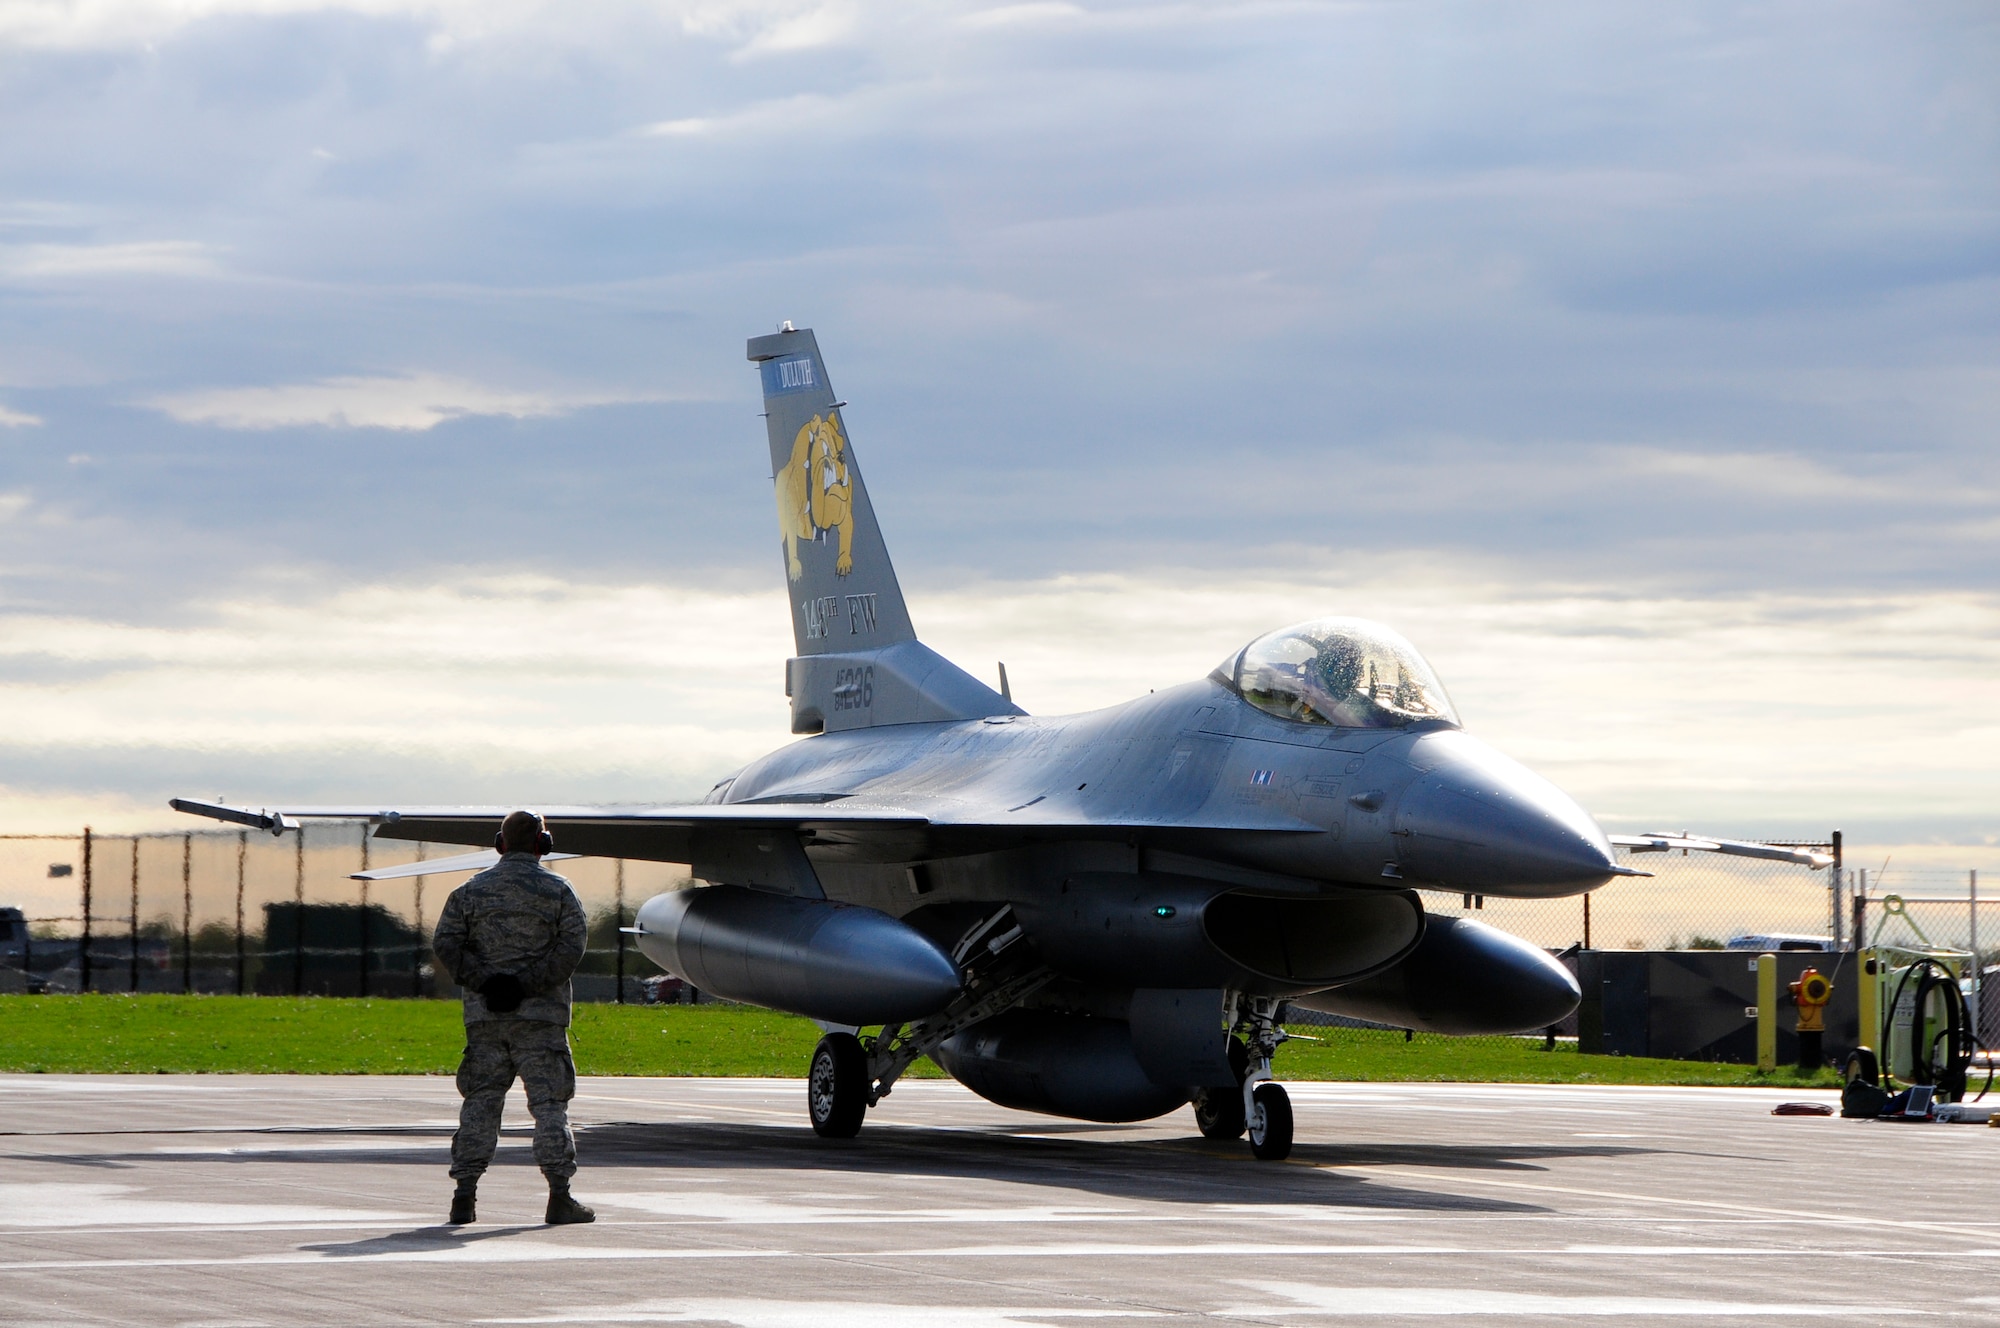 SSgt Charles Thurber stands by as the last Block 25 F-16 prepares for it's final departure flight on Sept. 14, 2010 at the 148th Fighter Wing Air National Guard Base in Duluth, Minn.  The 148th FW has transitioned to the Block 50 F-16 and this Block 25 was the last to be replaced.  (U.S. Air Force photo by SMSgt Ralph Kapustka)